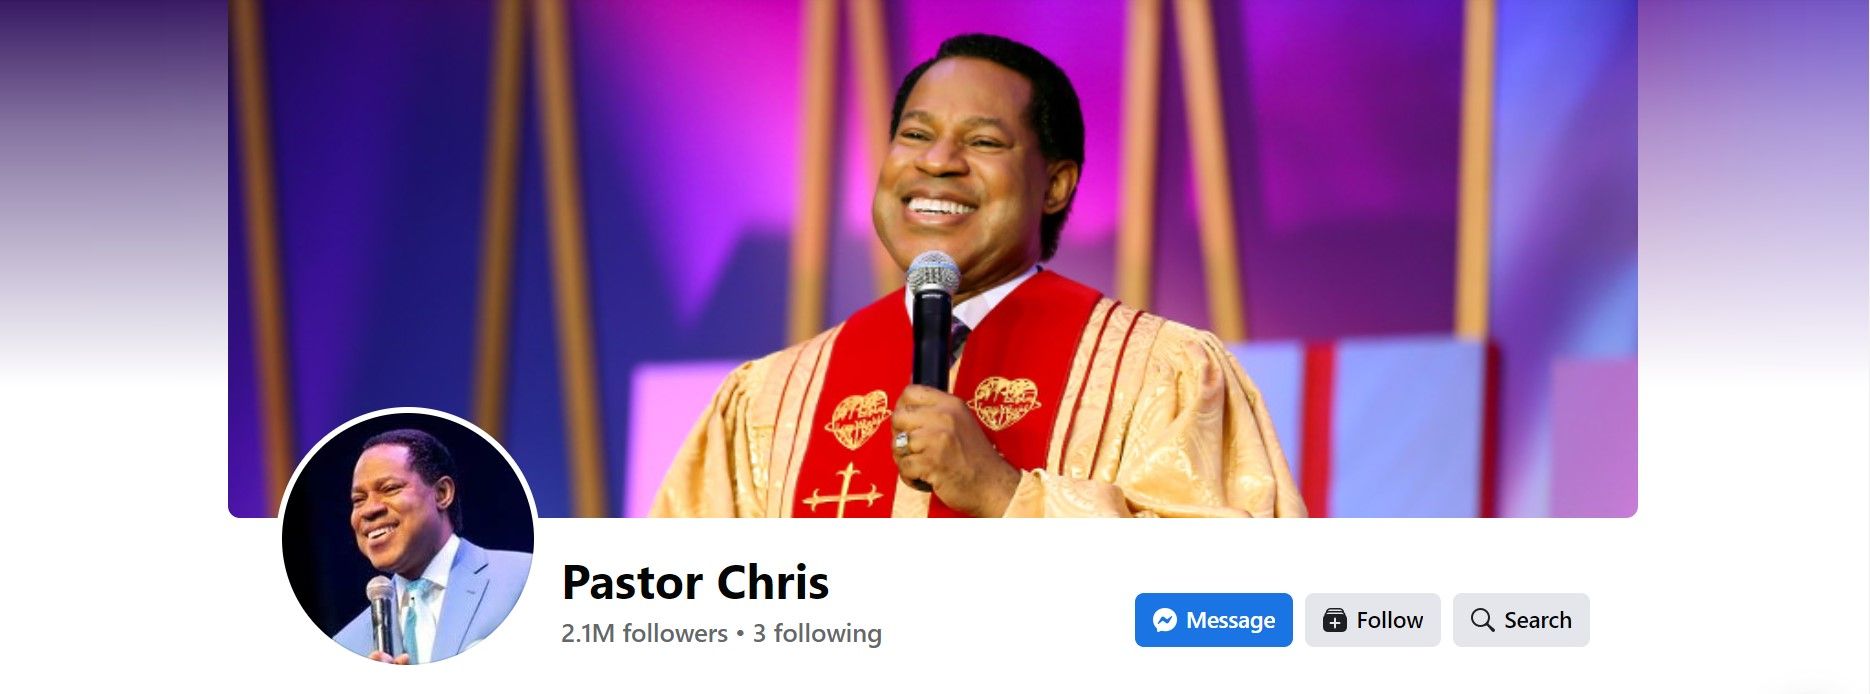 pastor chris facebook page with cover photo